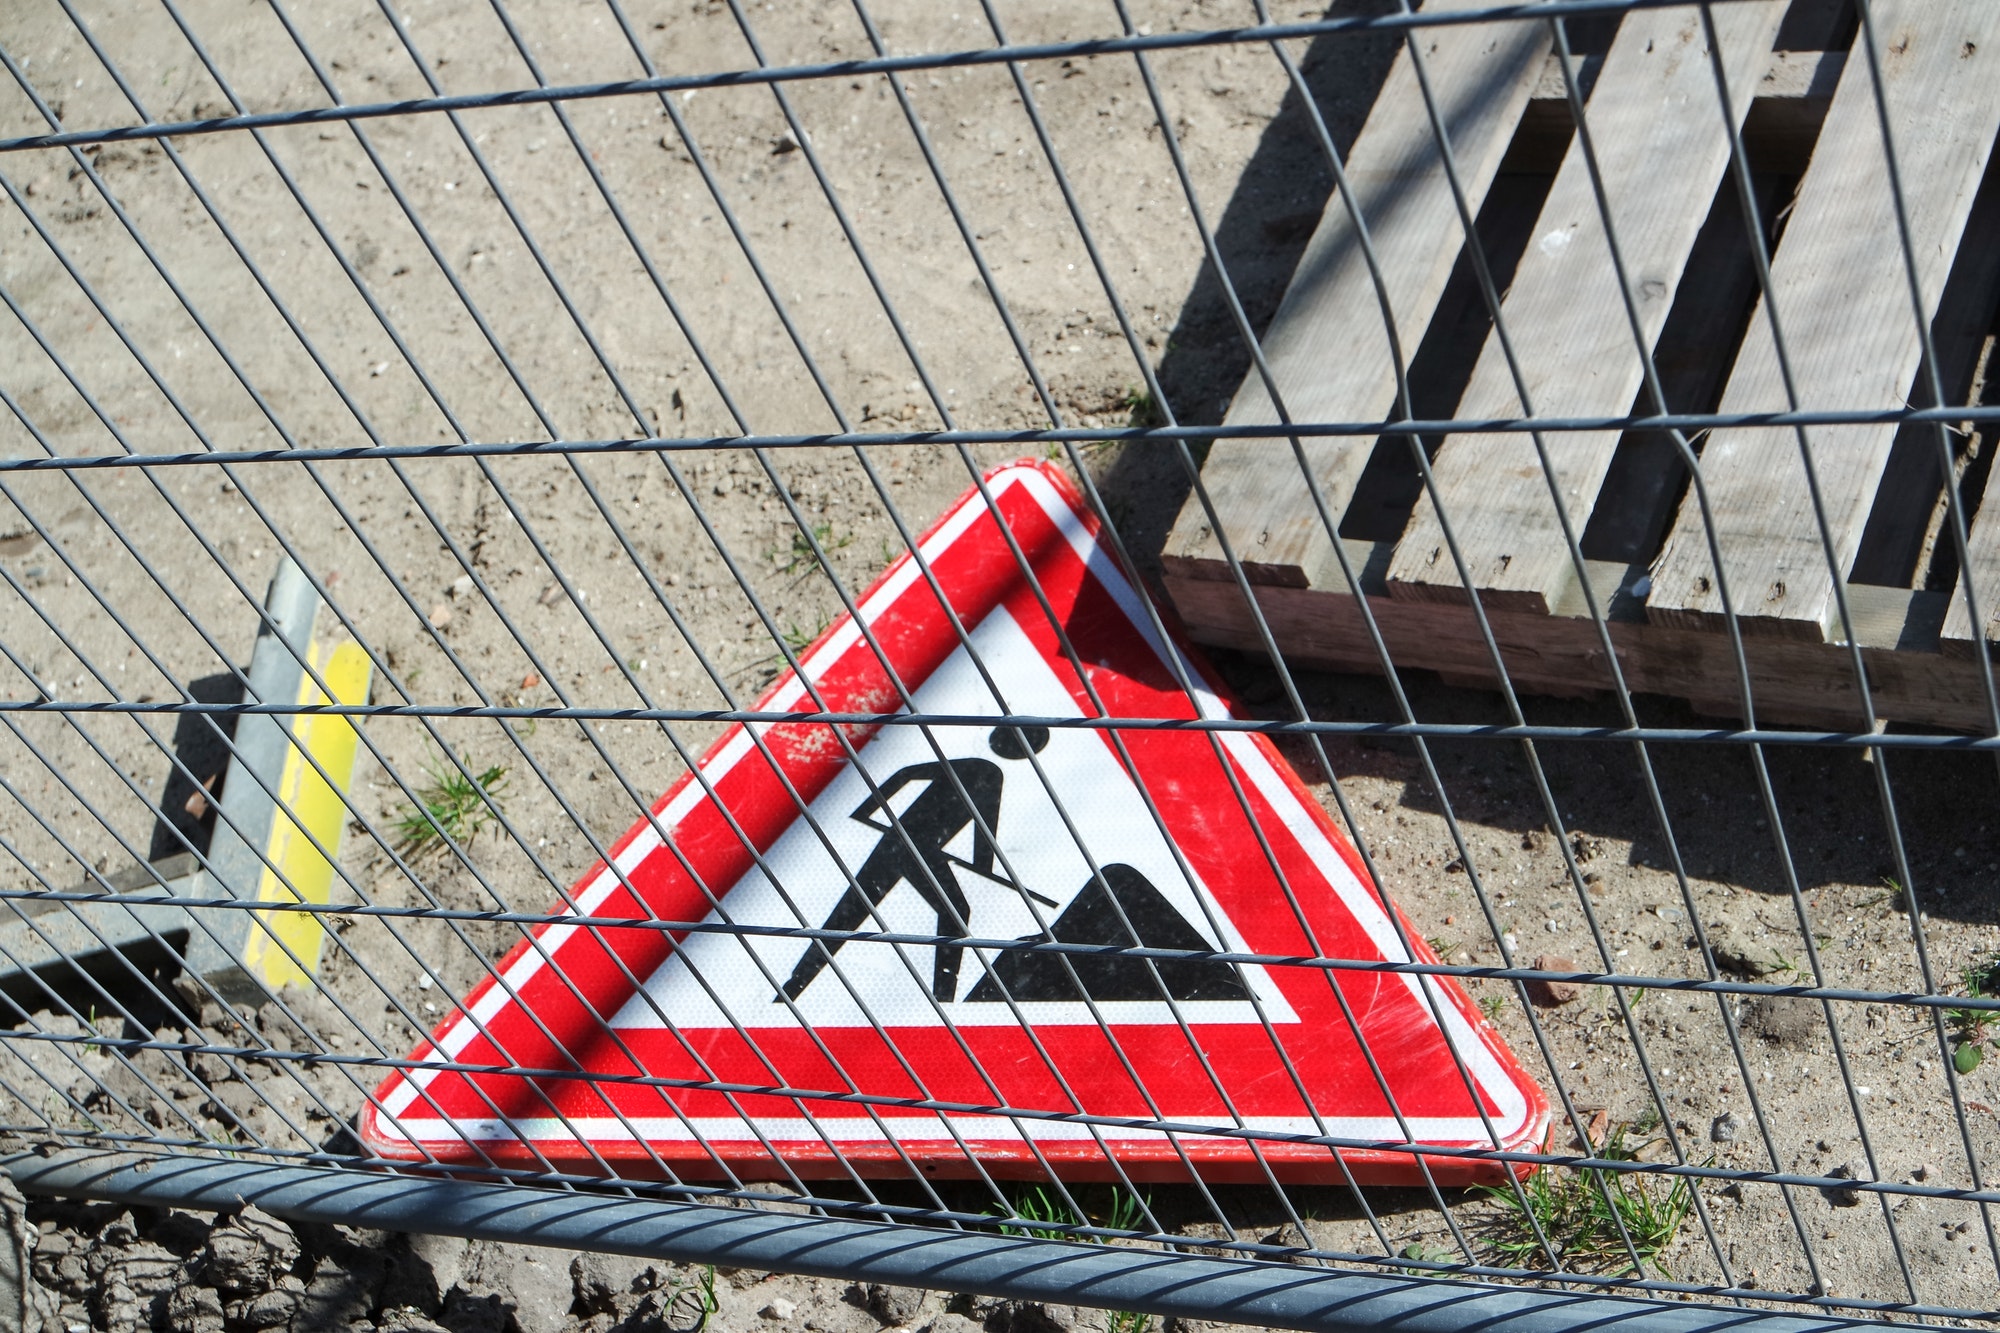 Road sign. Work in progress. Laying on the ground and behind the fence.